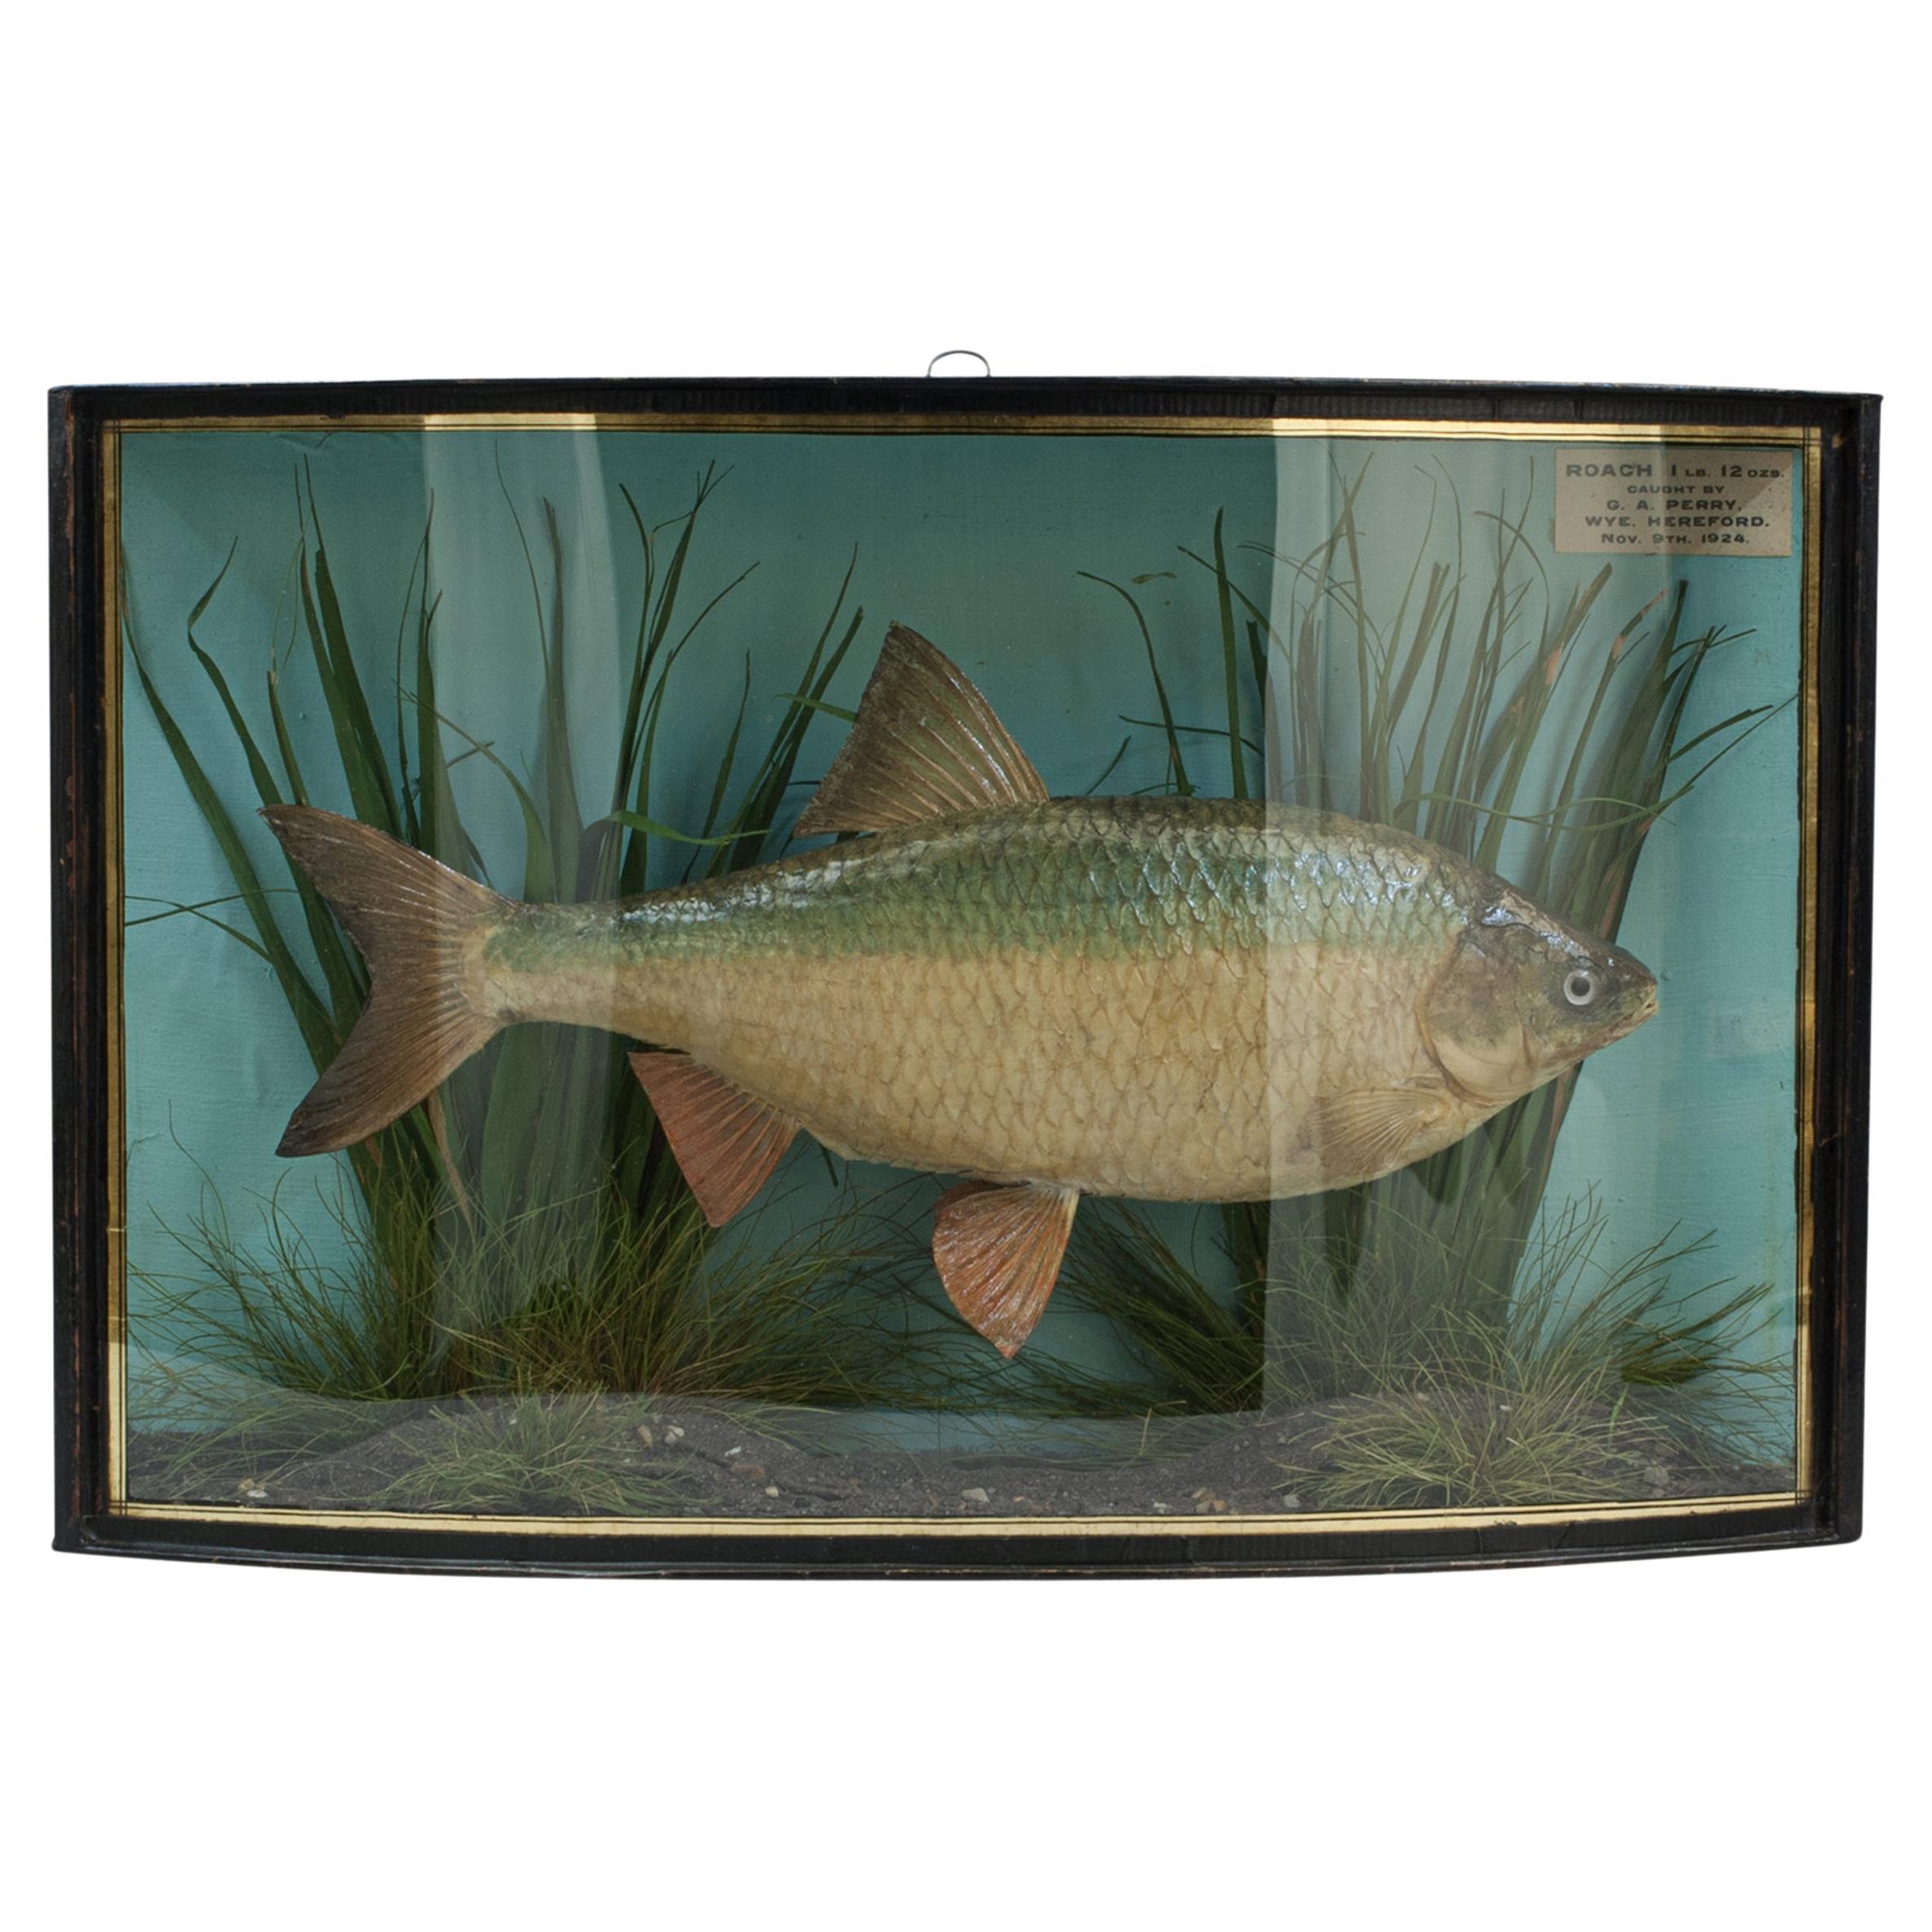 Fish Pepared in Bow Fronted Case, Roach en vente